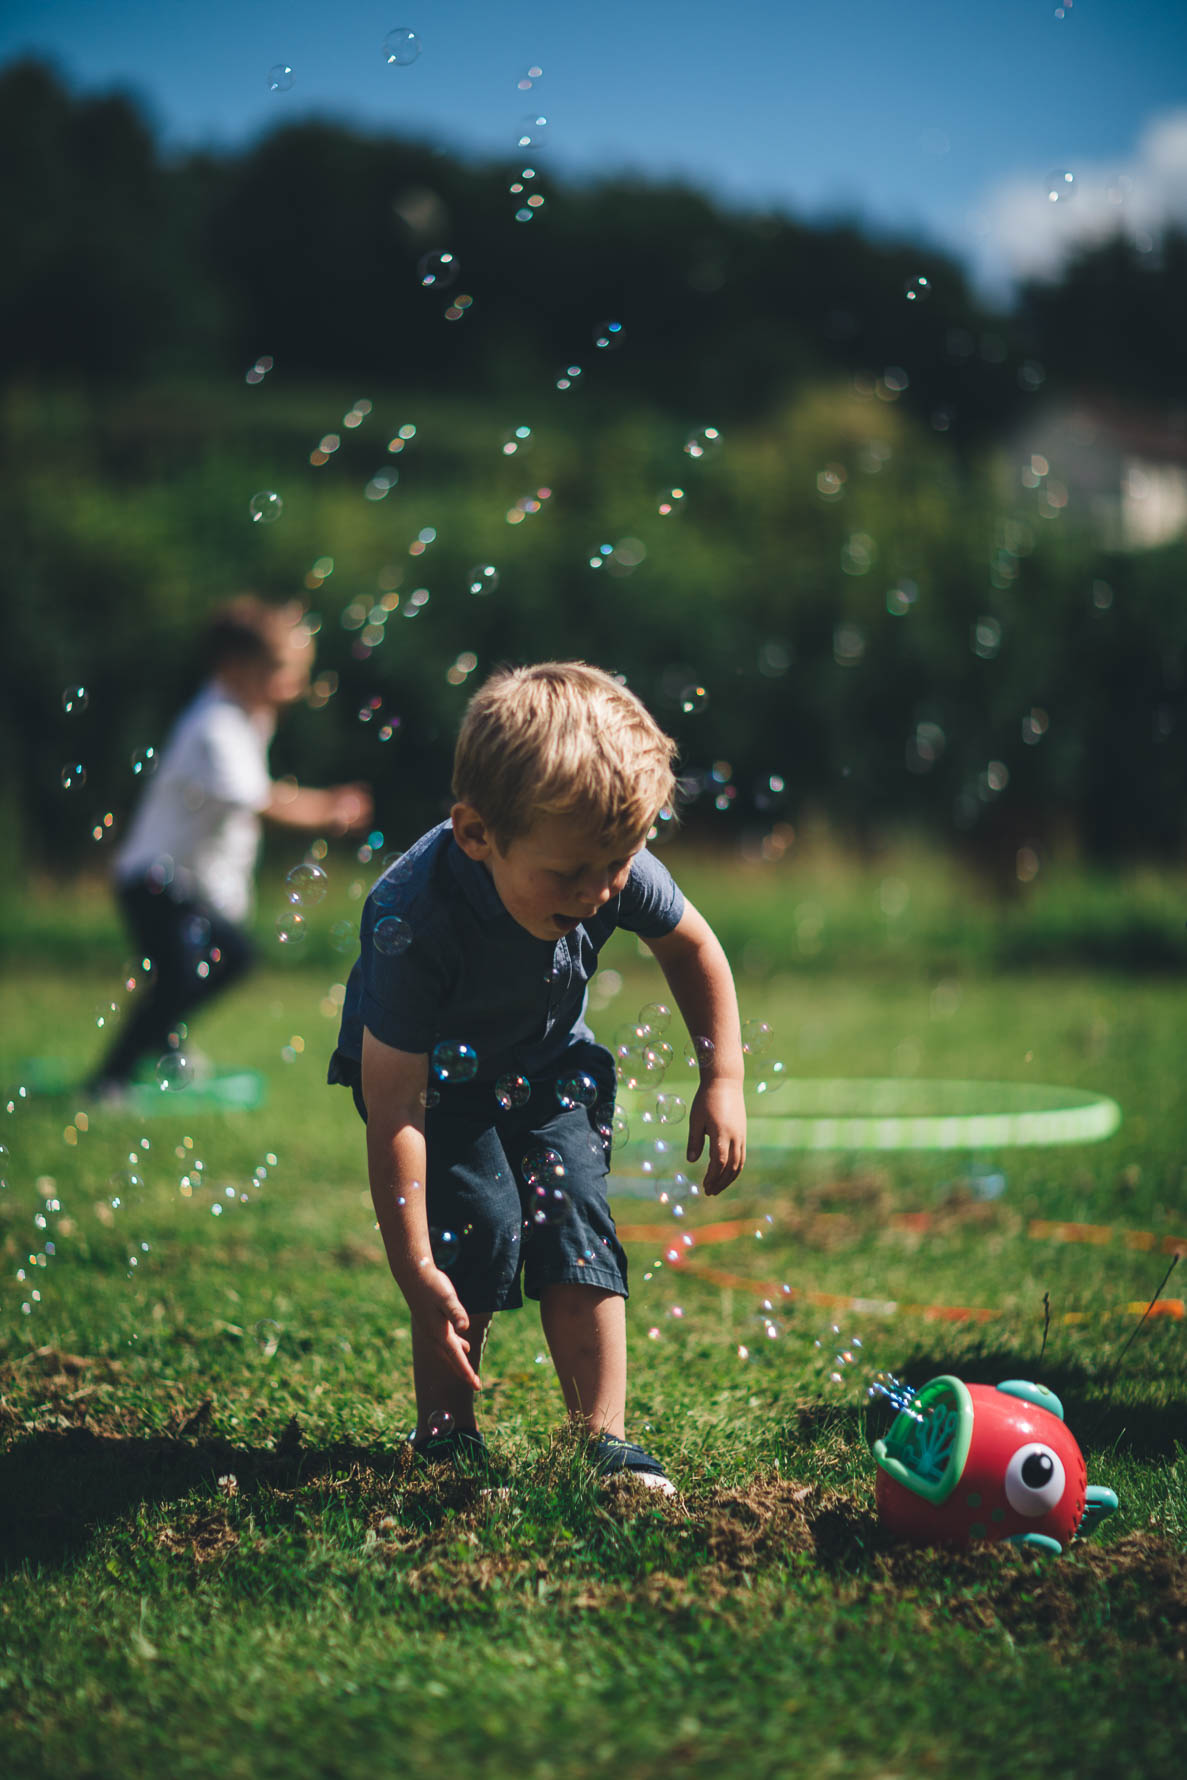 Young boy stood on a lawn bending down to catch some bubbles which are being blown out of a fish-shaped bubble machine